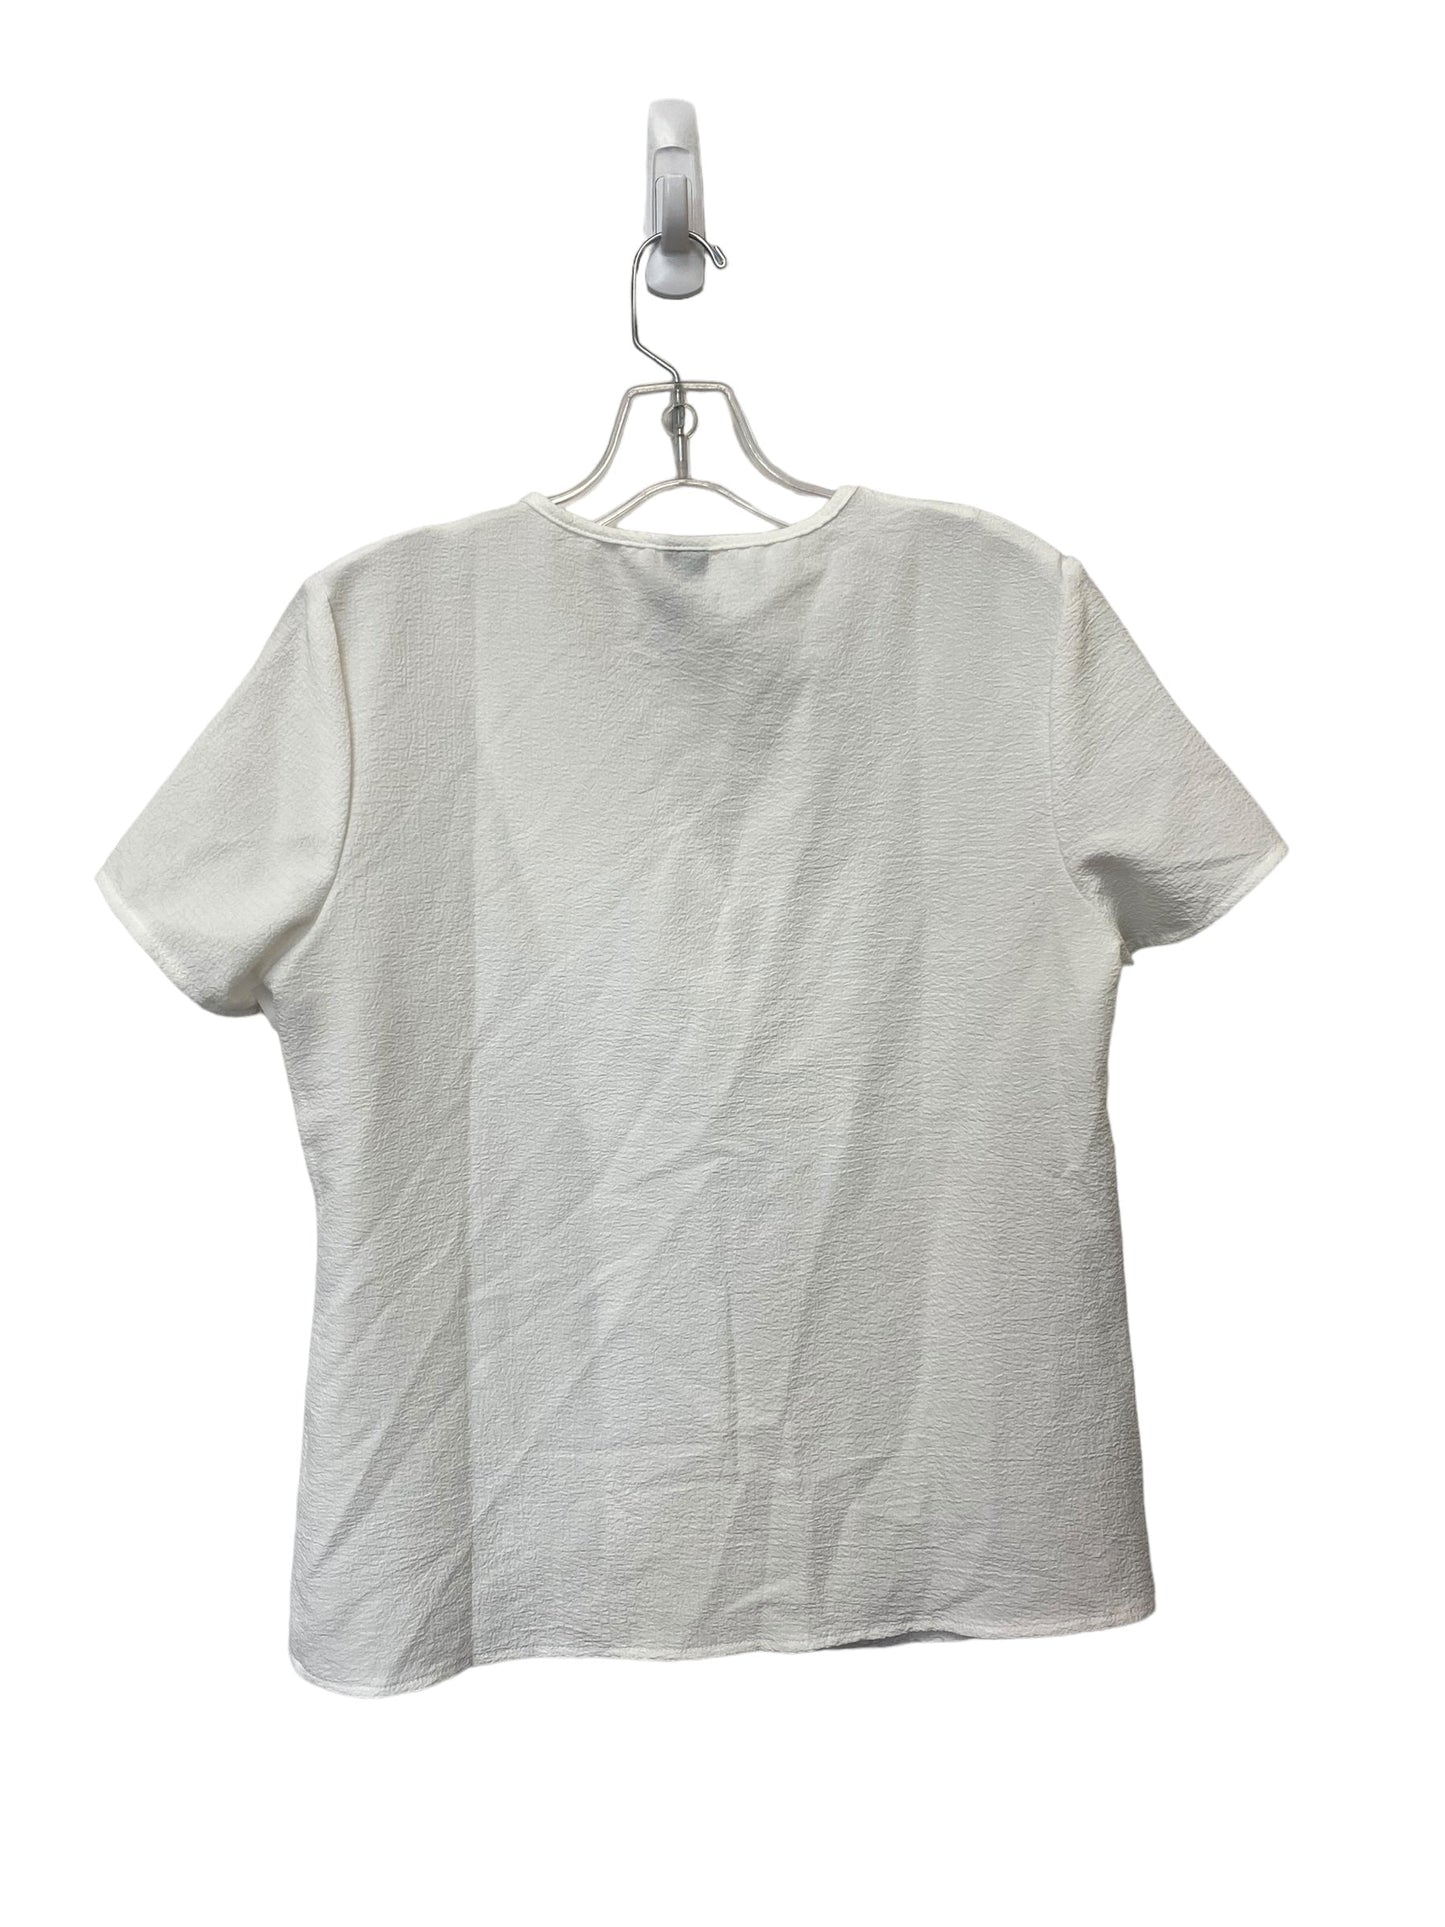 White Top Short Sleeve Clothes Mentor, Size S